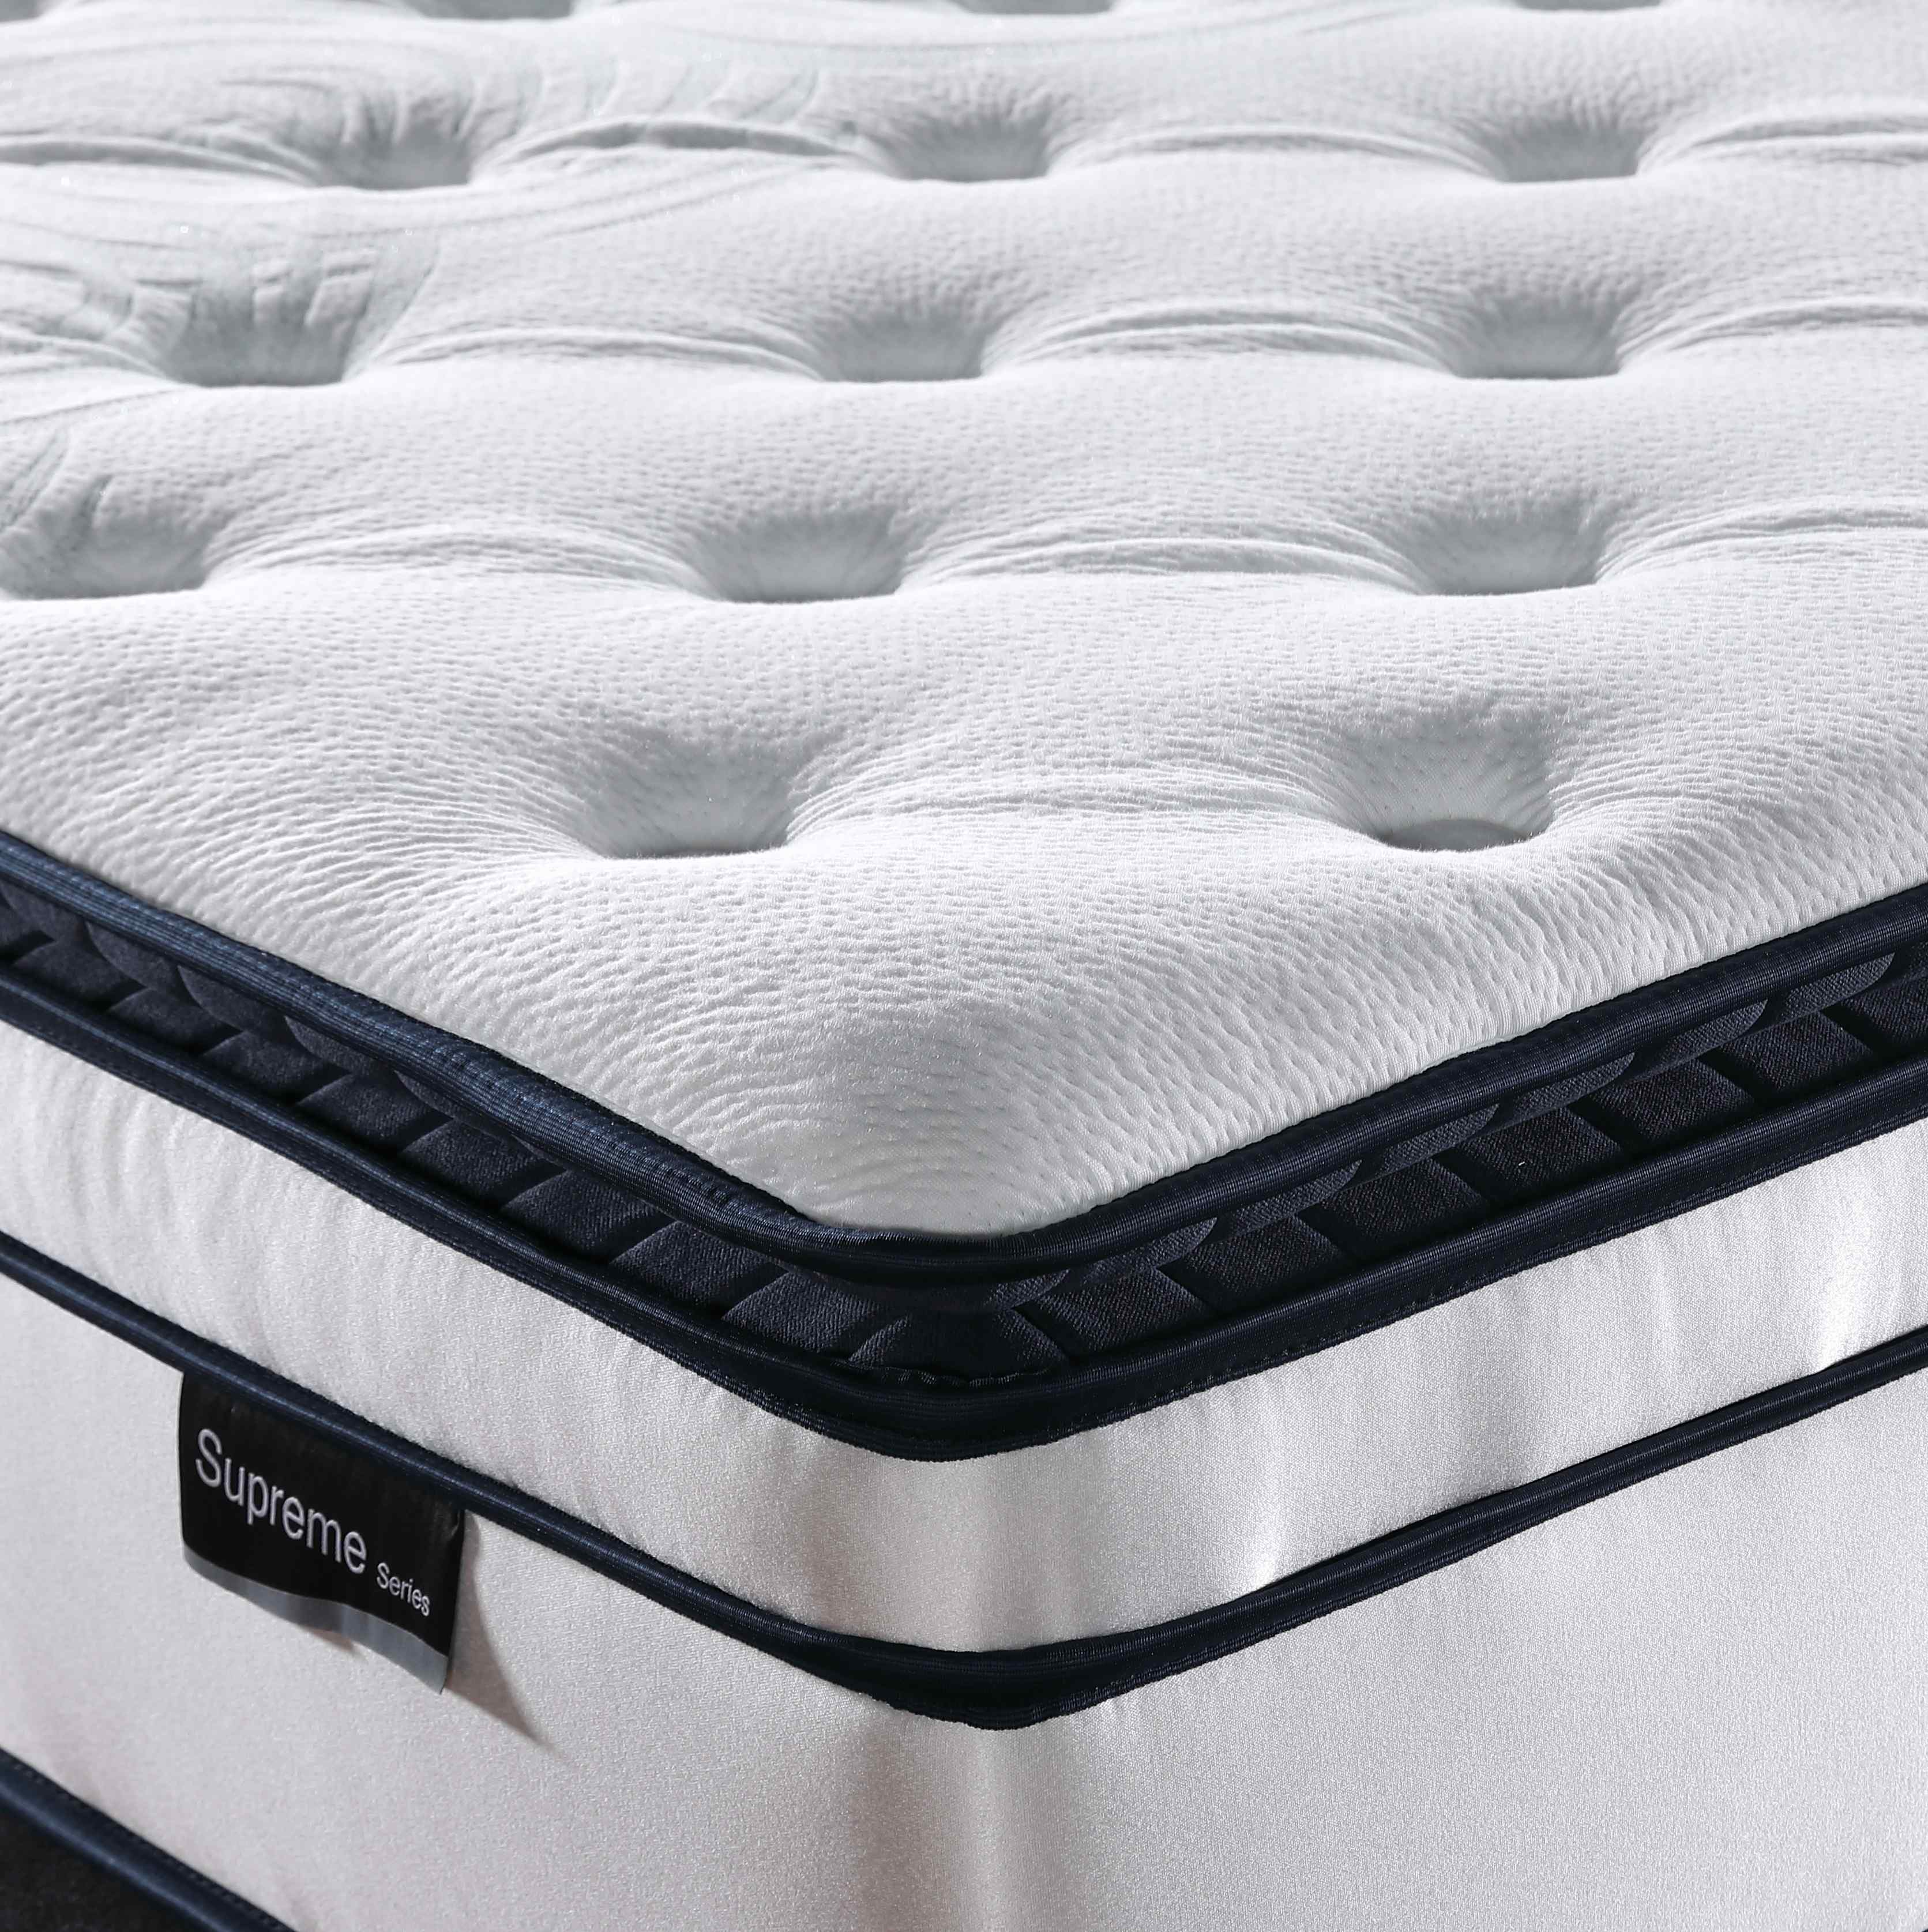 JLH traditional spring mattress for business with softness